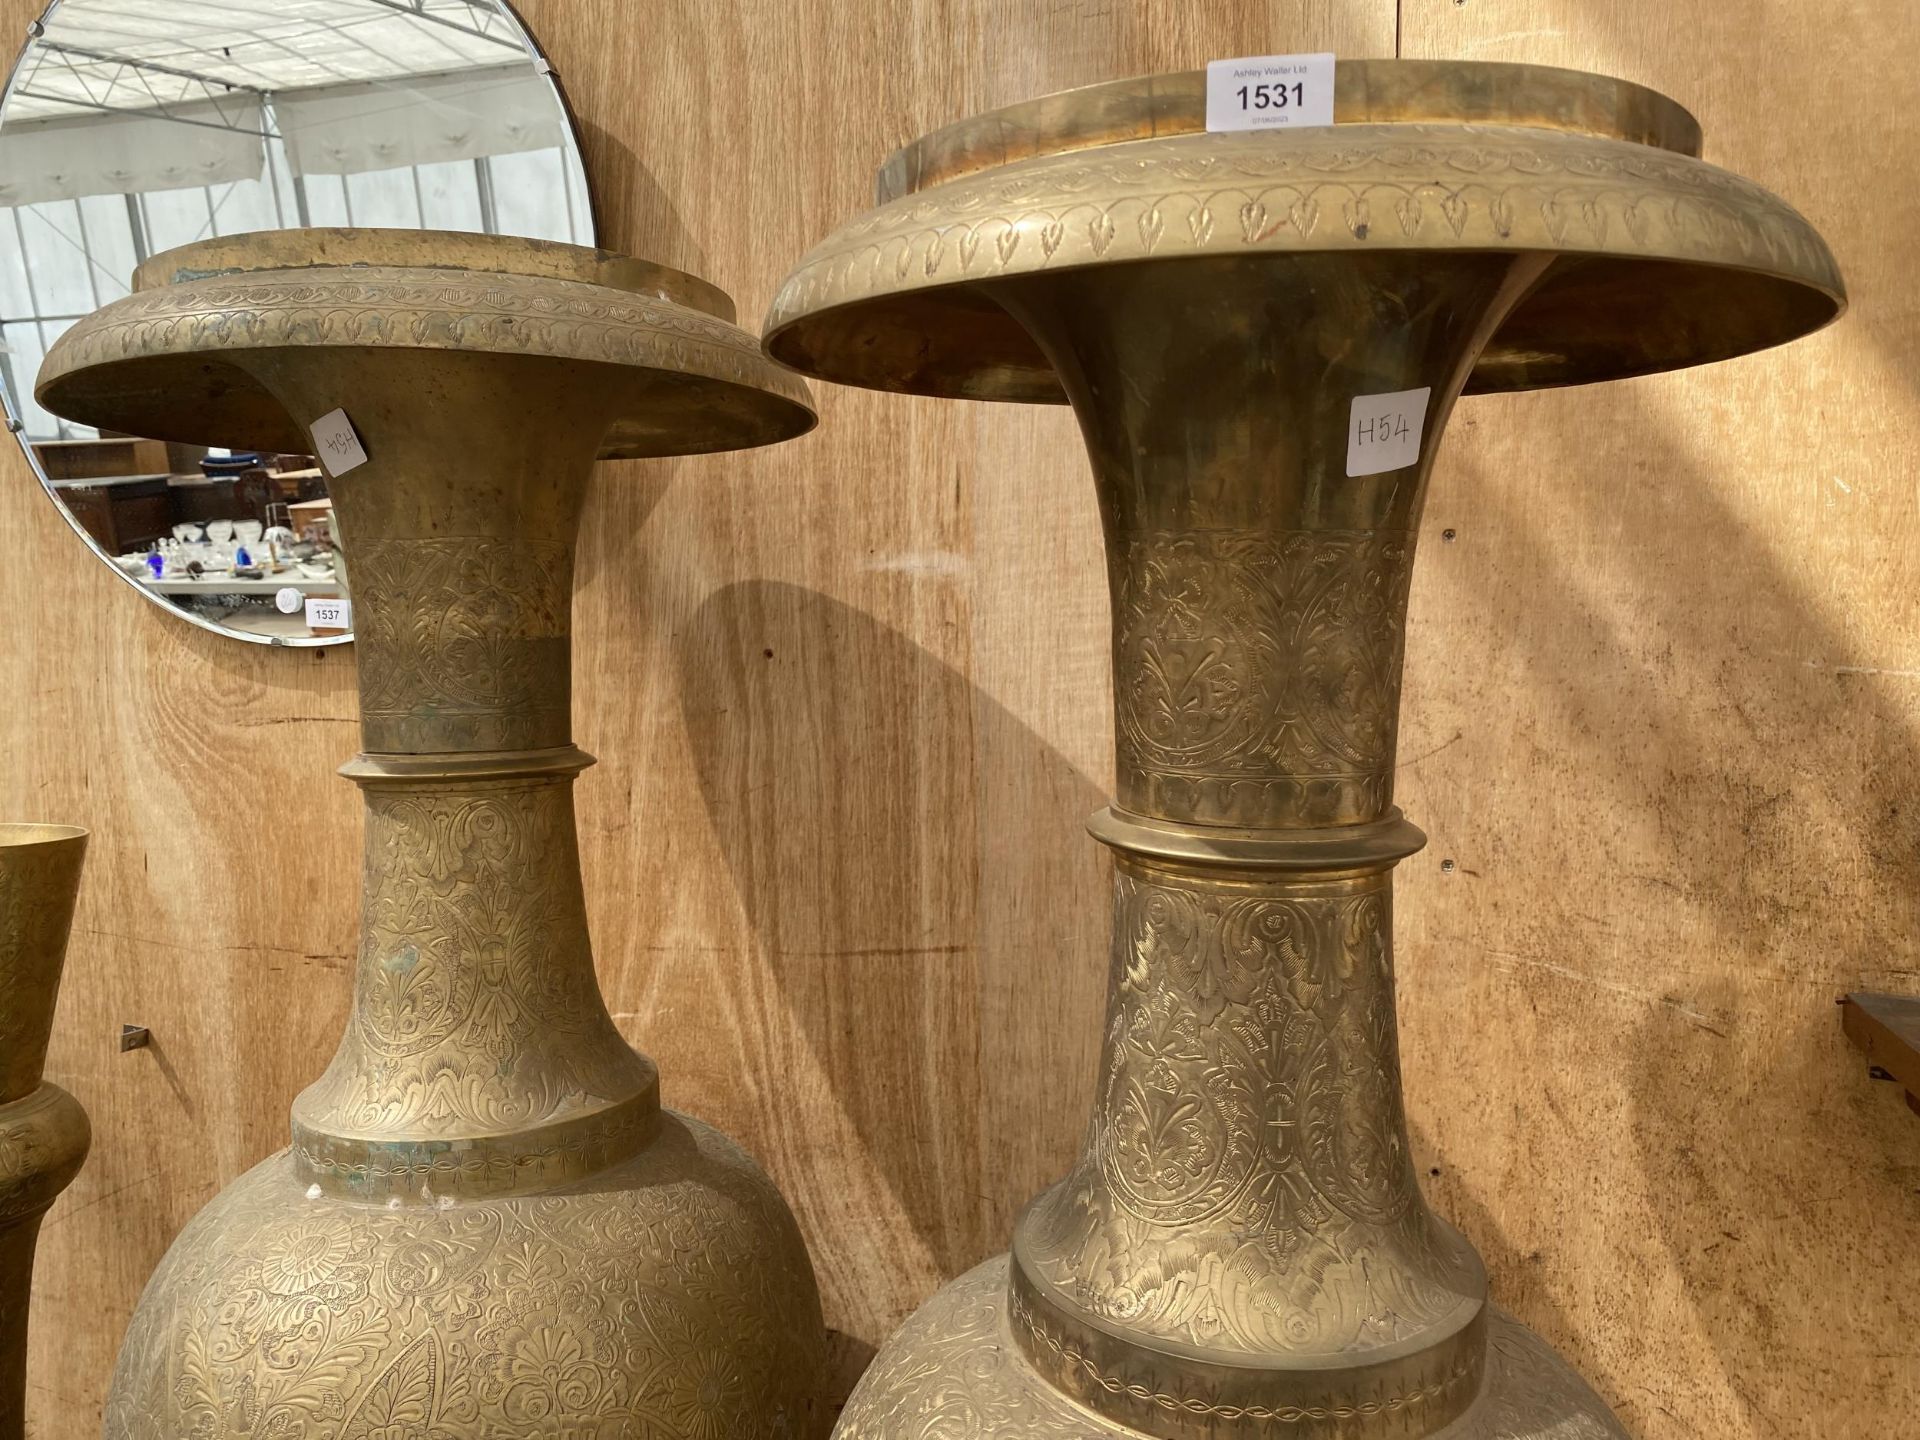 A PAIR OF LARGE VINTAGE DECORATIVE BRASS URNS (H:153CM) - Image 2 of 6